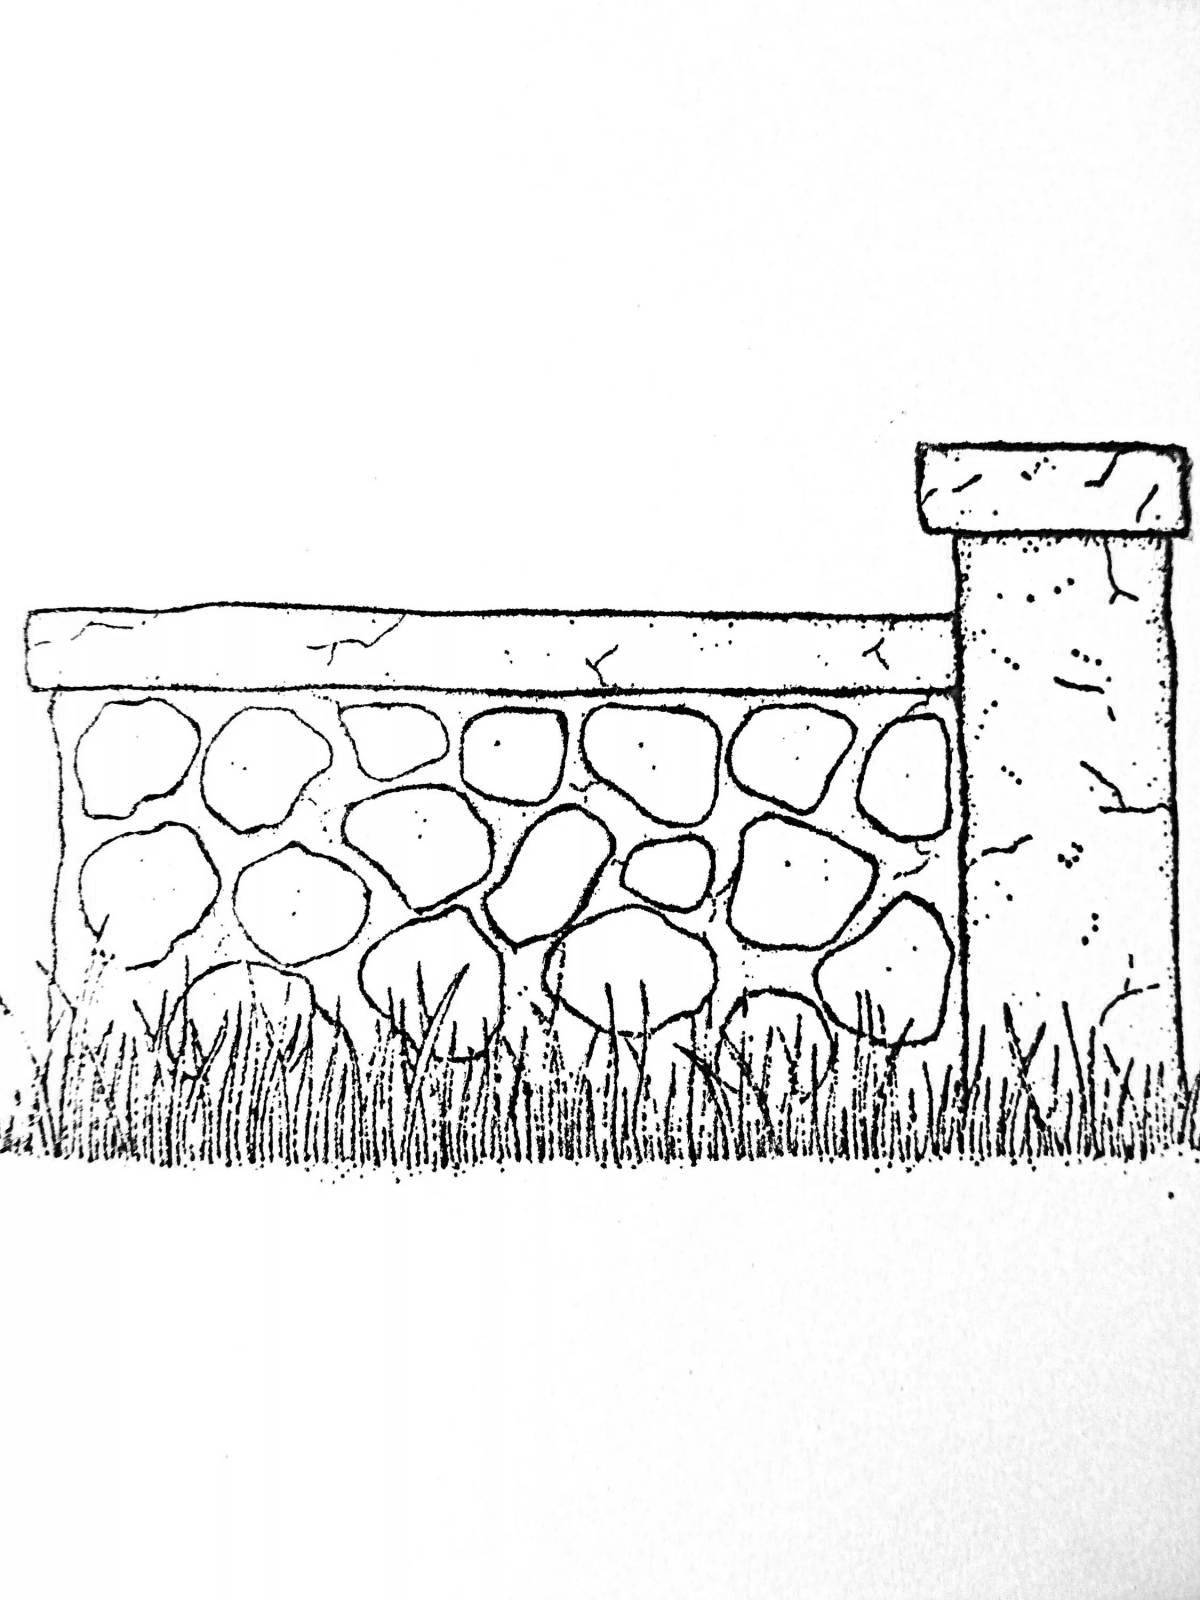 Impressive stone wall coloring page